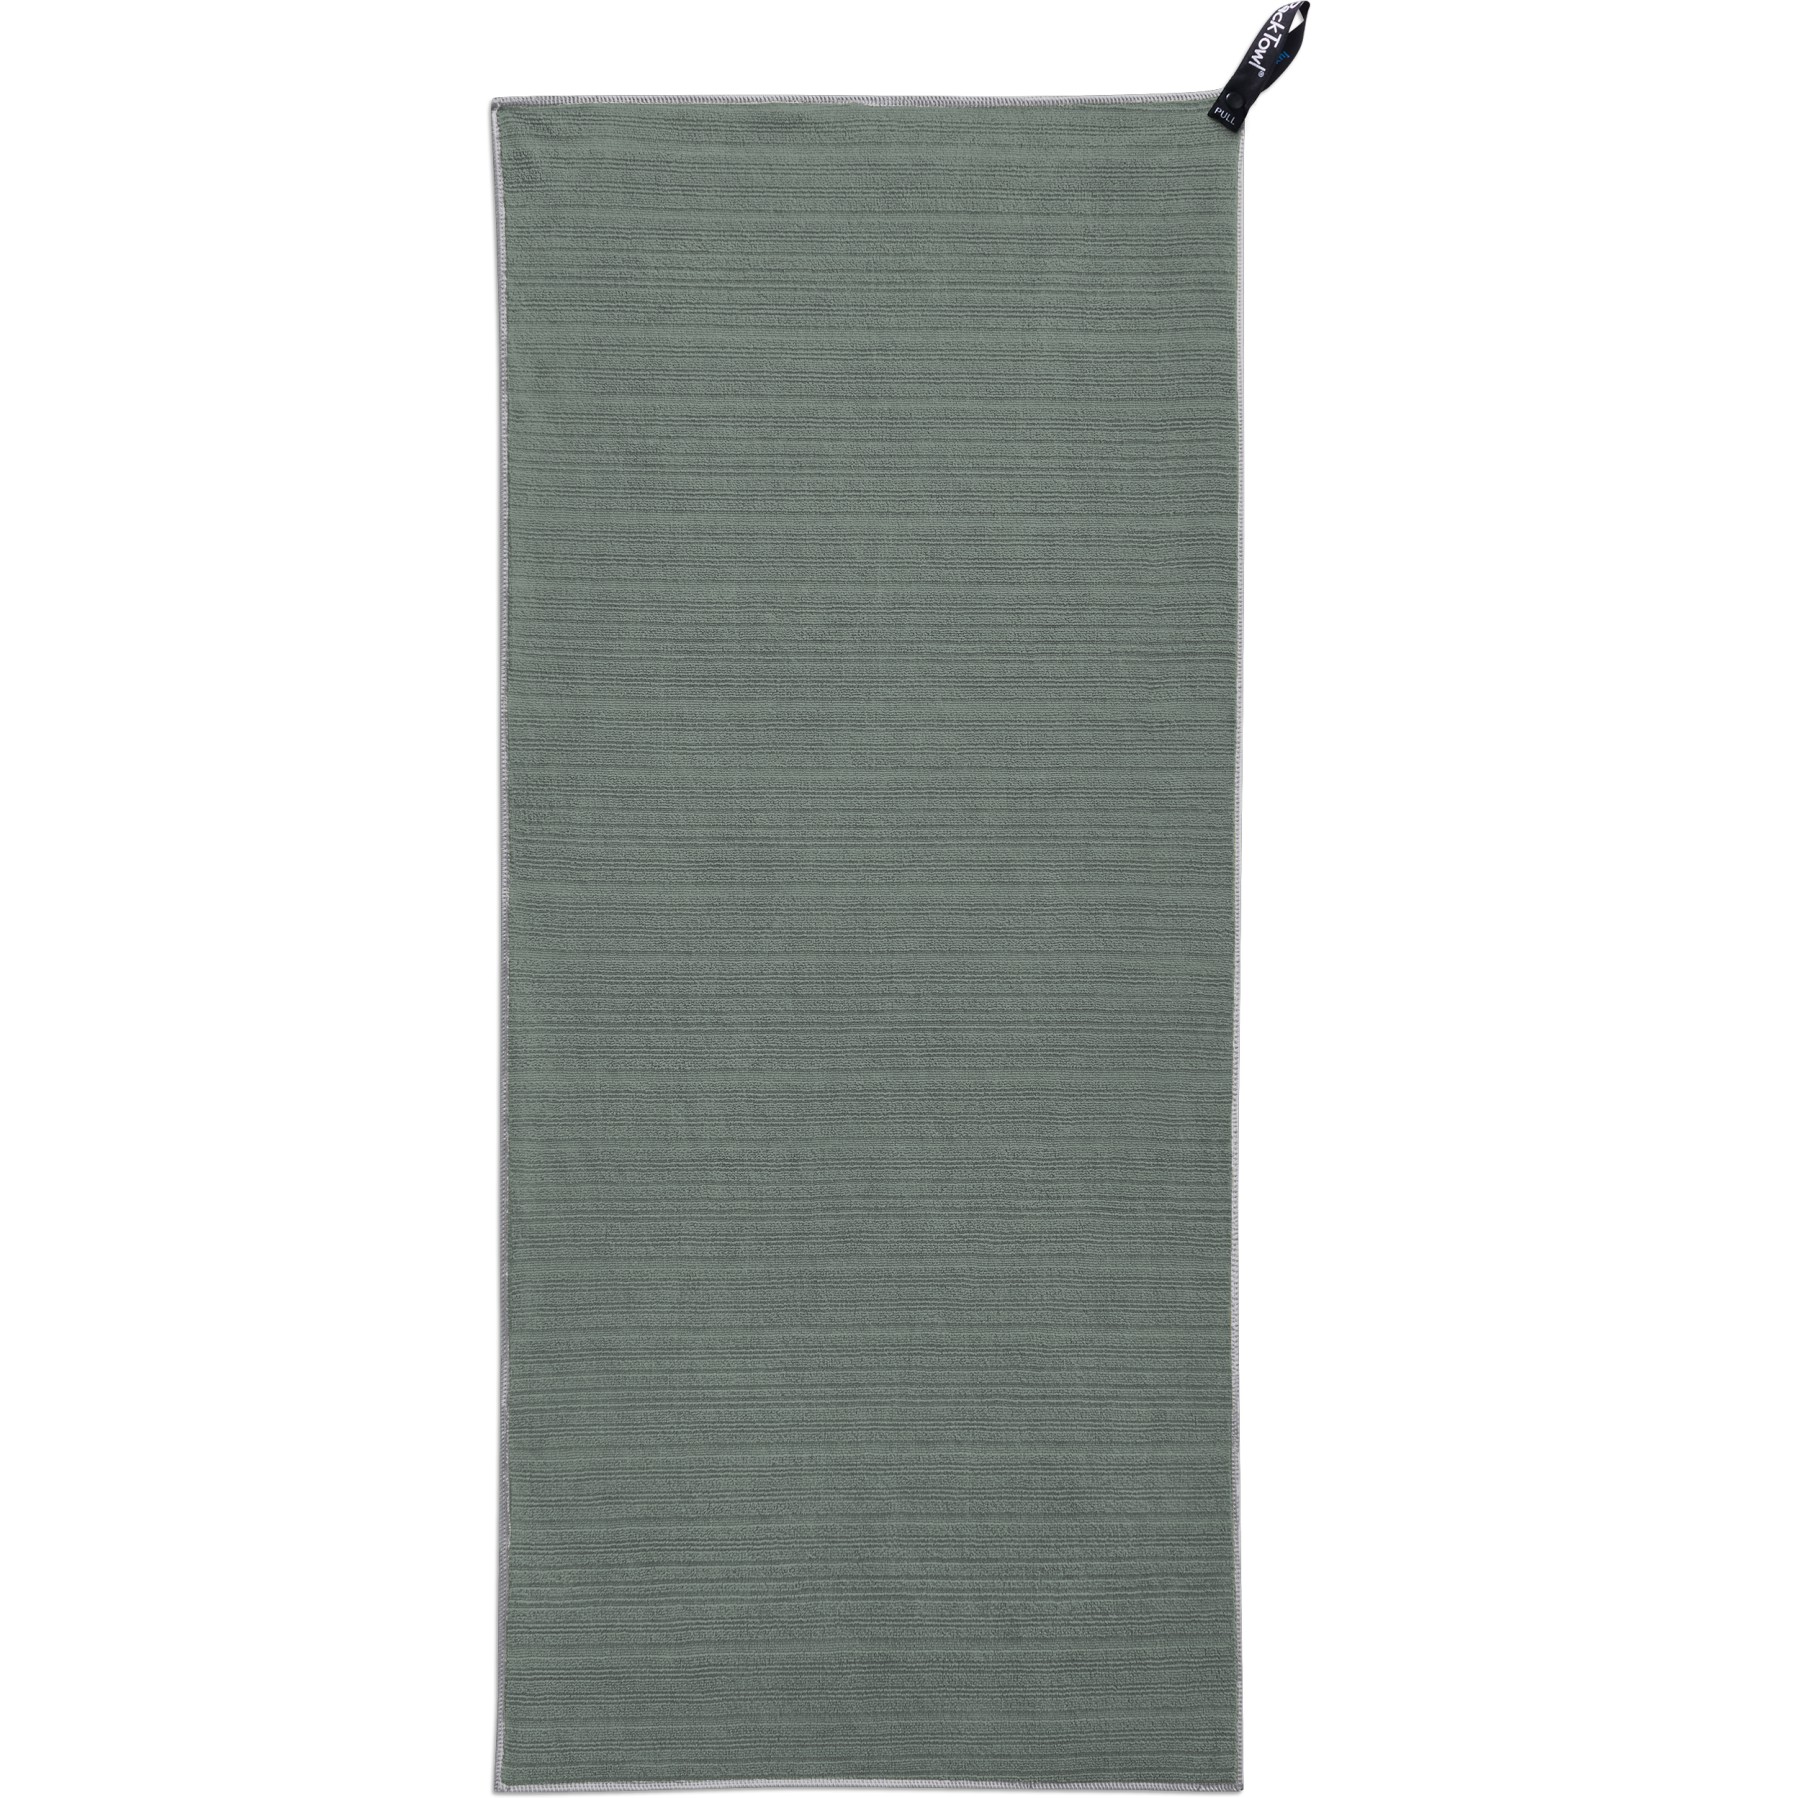 Picture of PackTowl Luxe Body Towel - sage